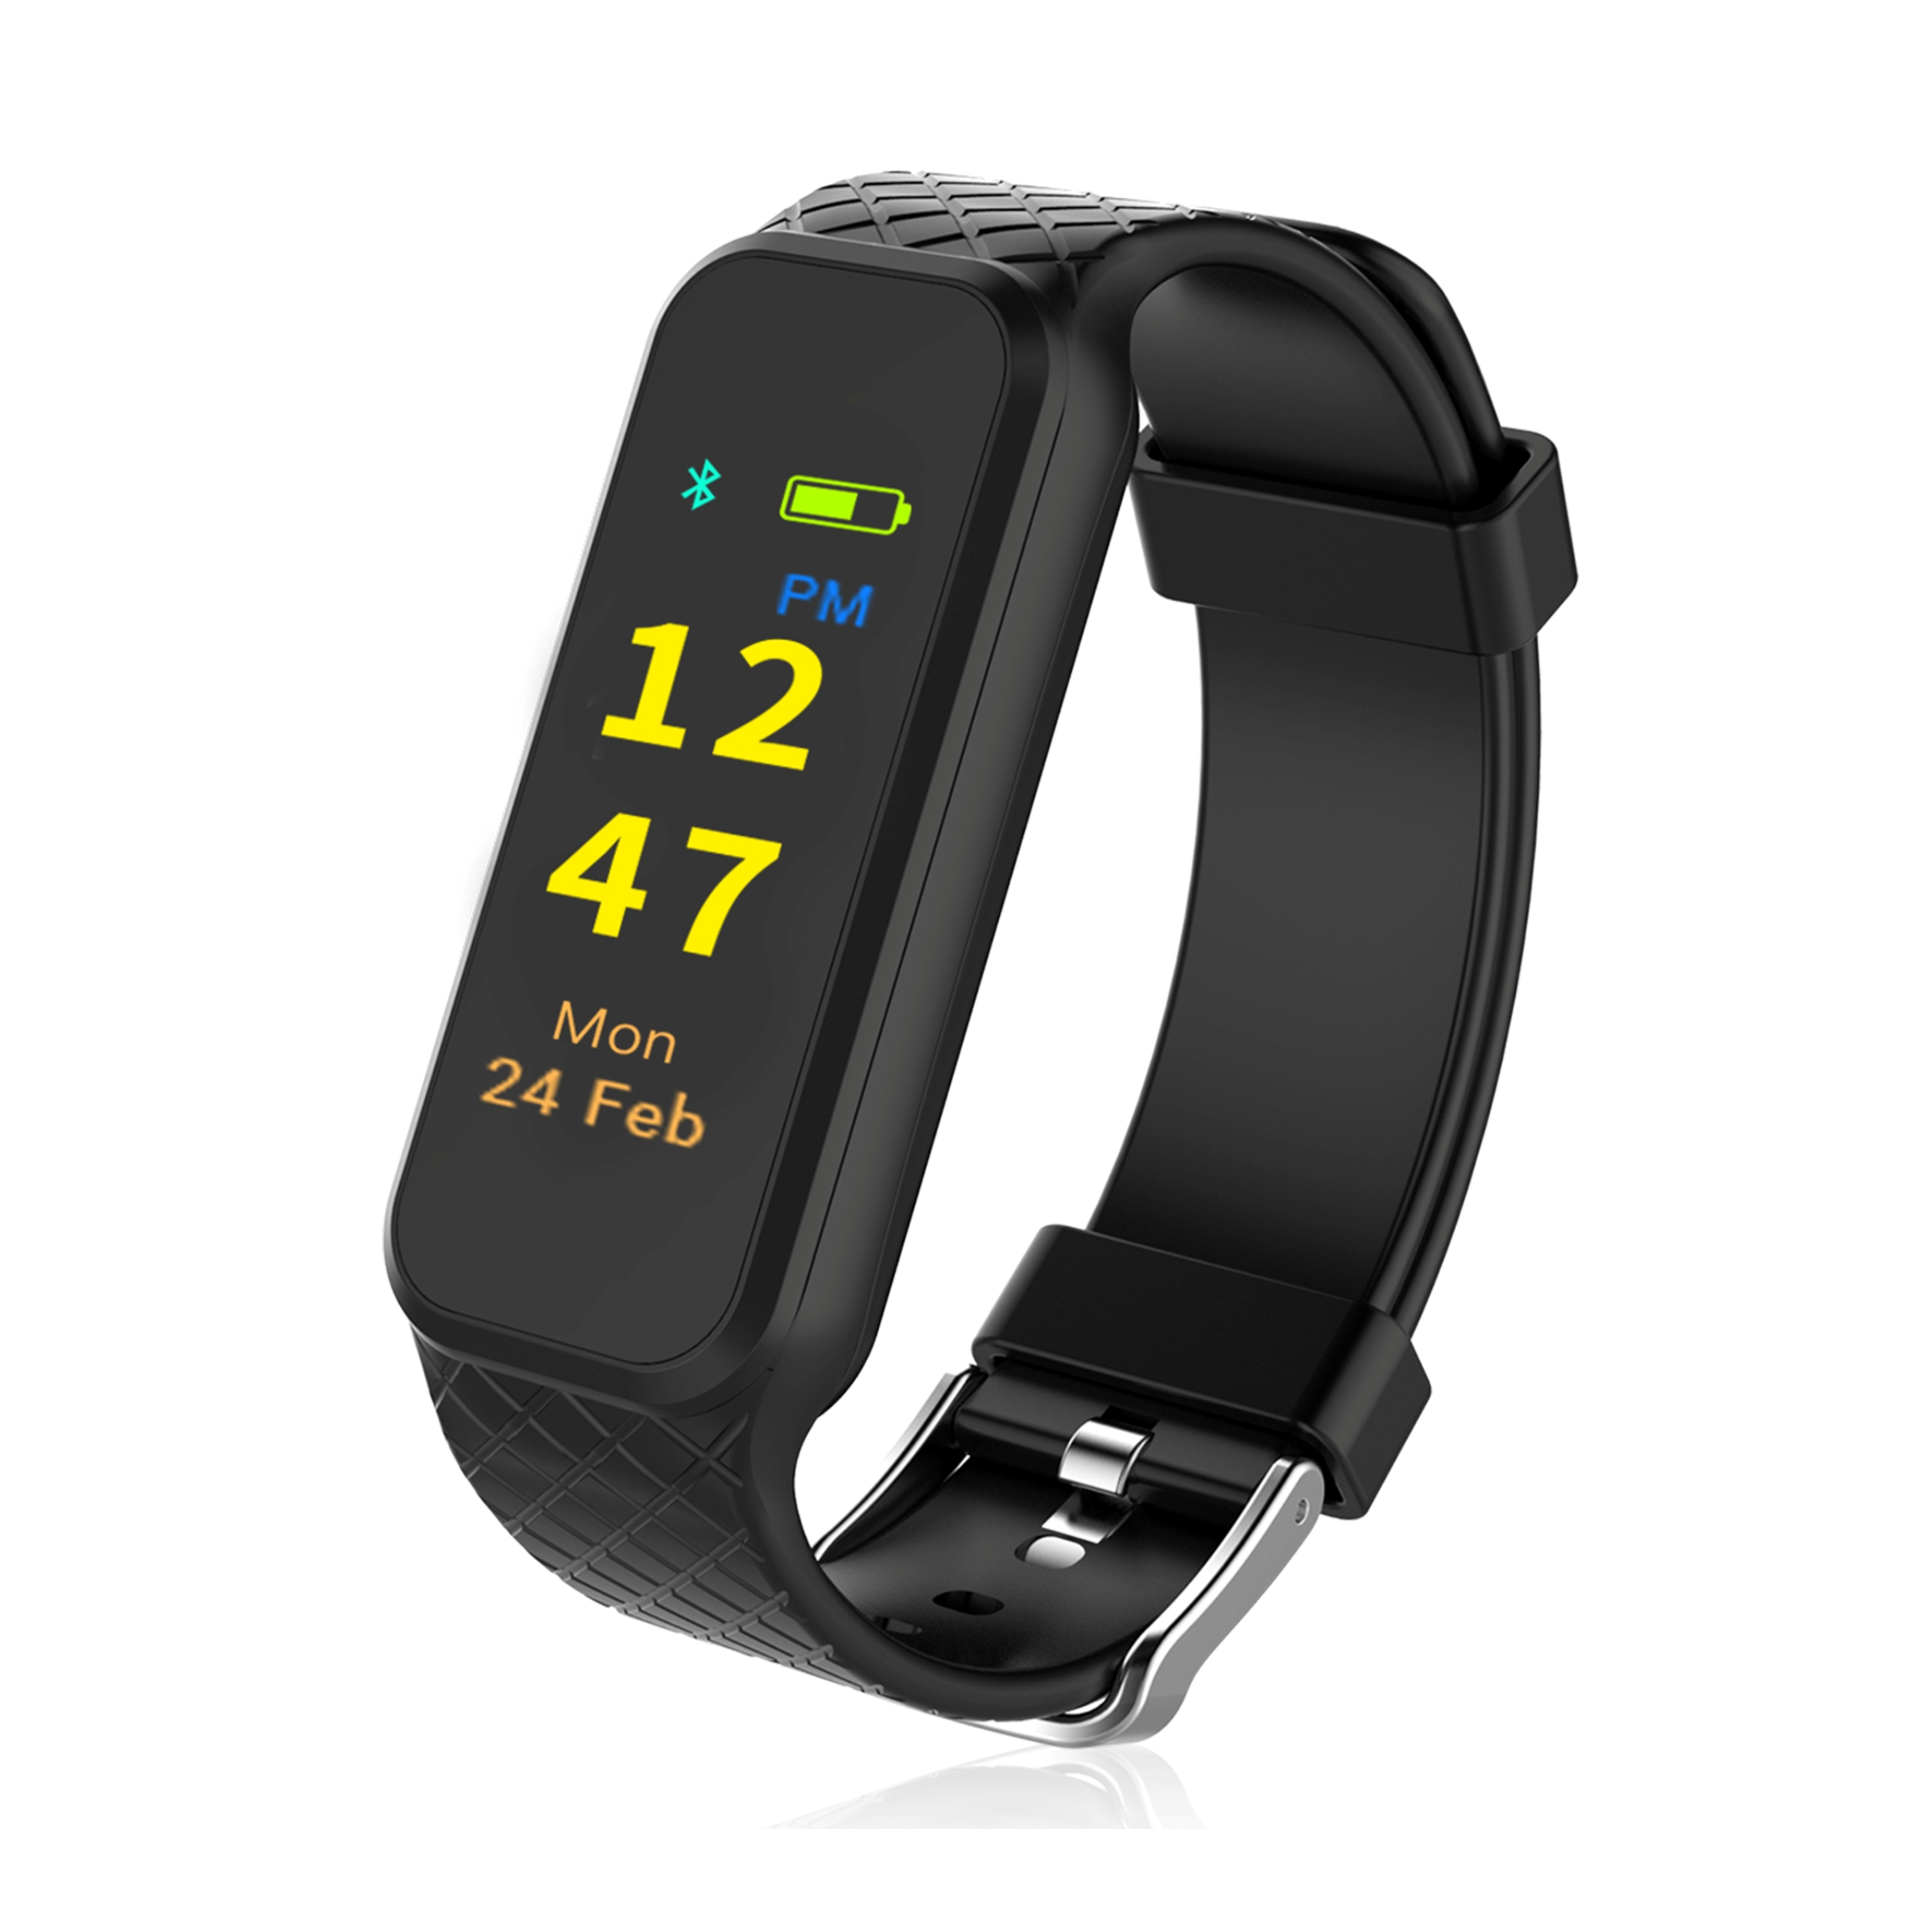 Read more about the article Portronics Launches “Yogg HR” Slim & Smart Fitness Tracker